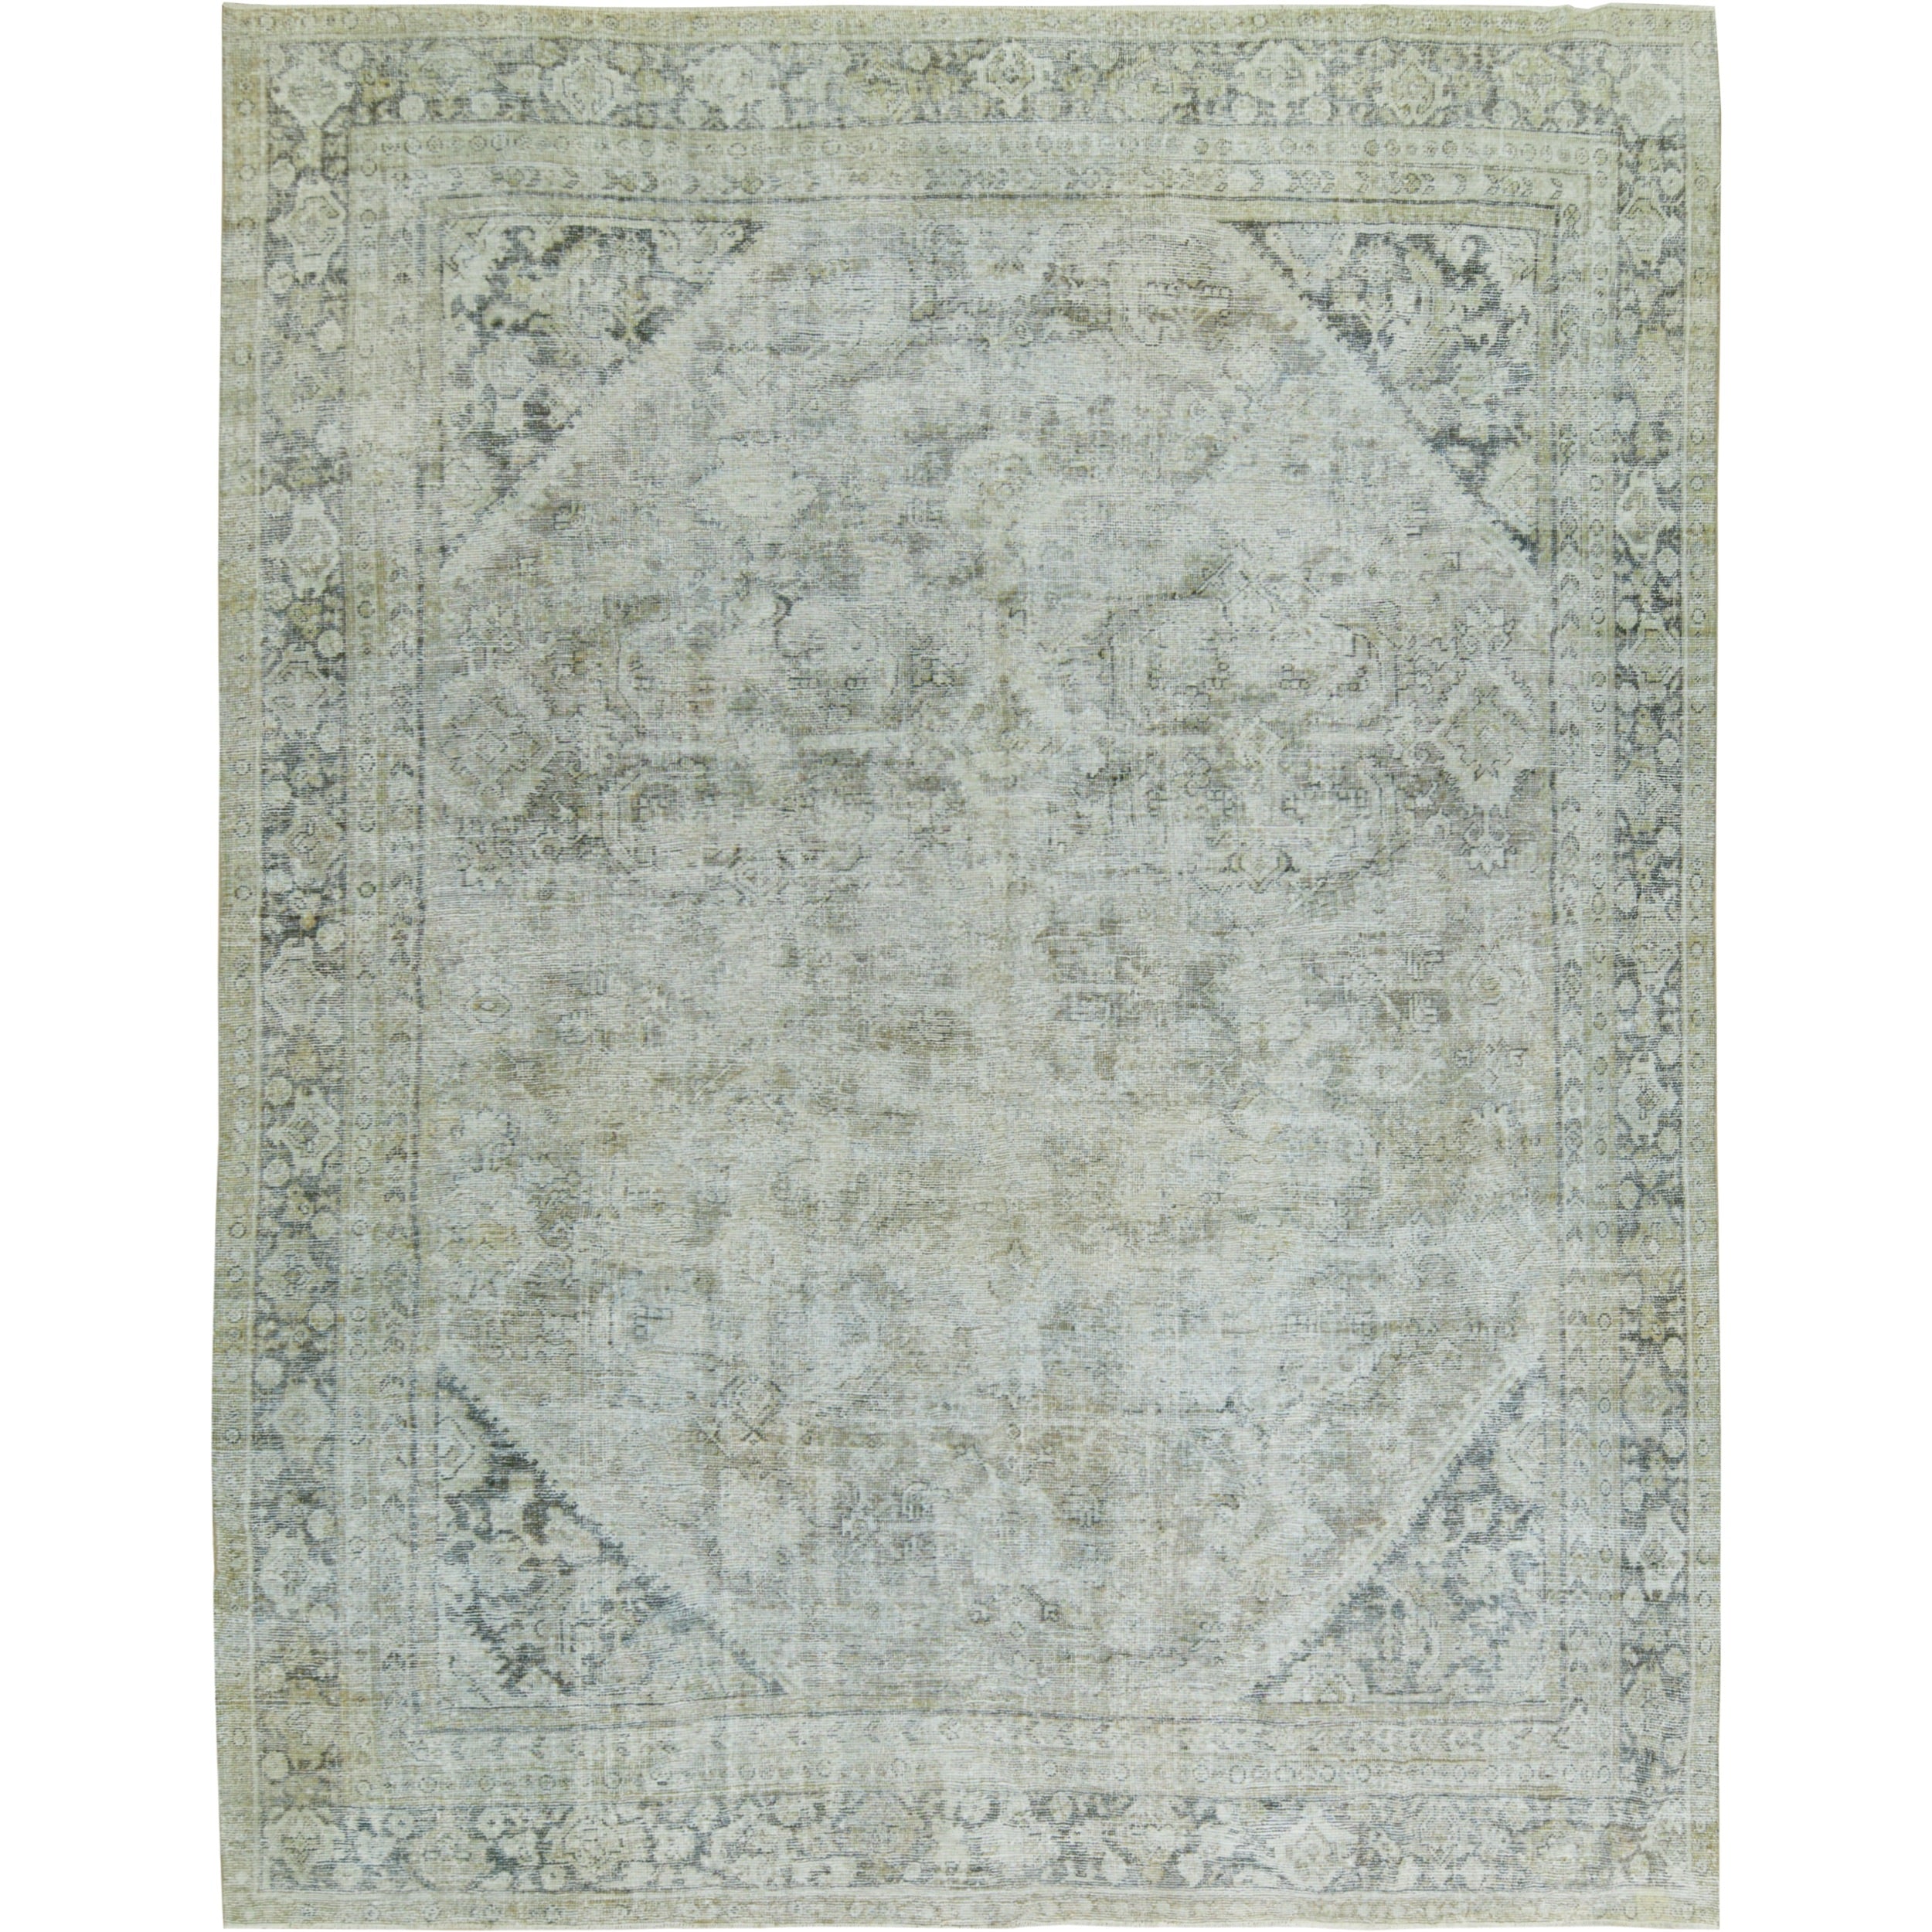 Pristine - Vintage Turkish Rug, Elevating Your Floors with Timeless Beauty | Kuden Rugs